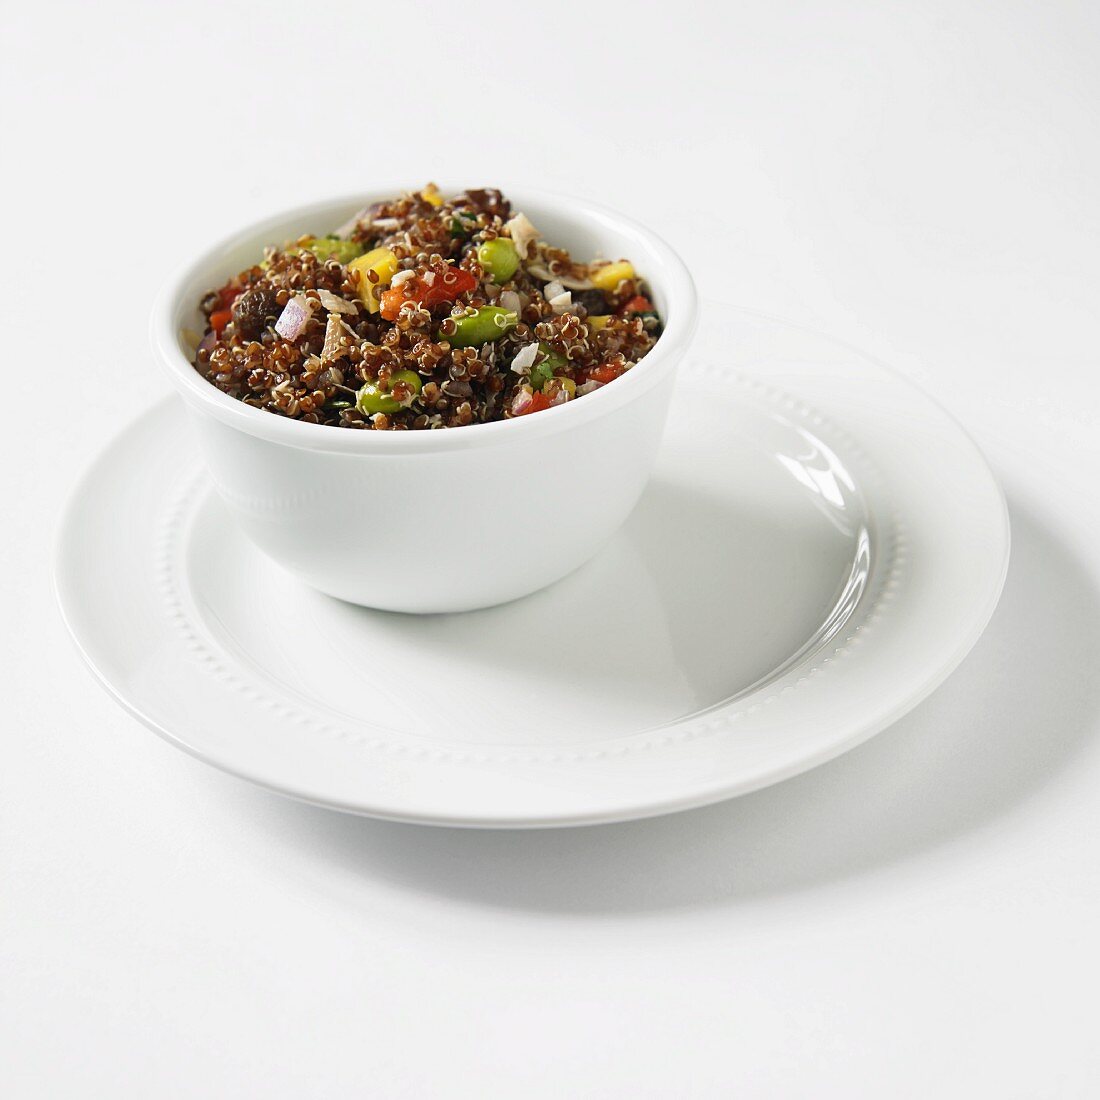 Red Quinoa Salad with Mango, Onion and Soy Beans in a White Bowl on a White Plate